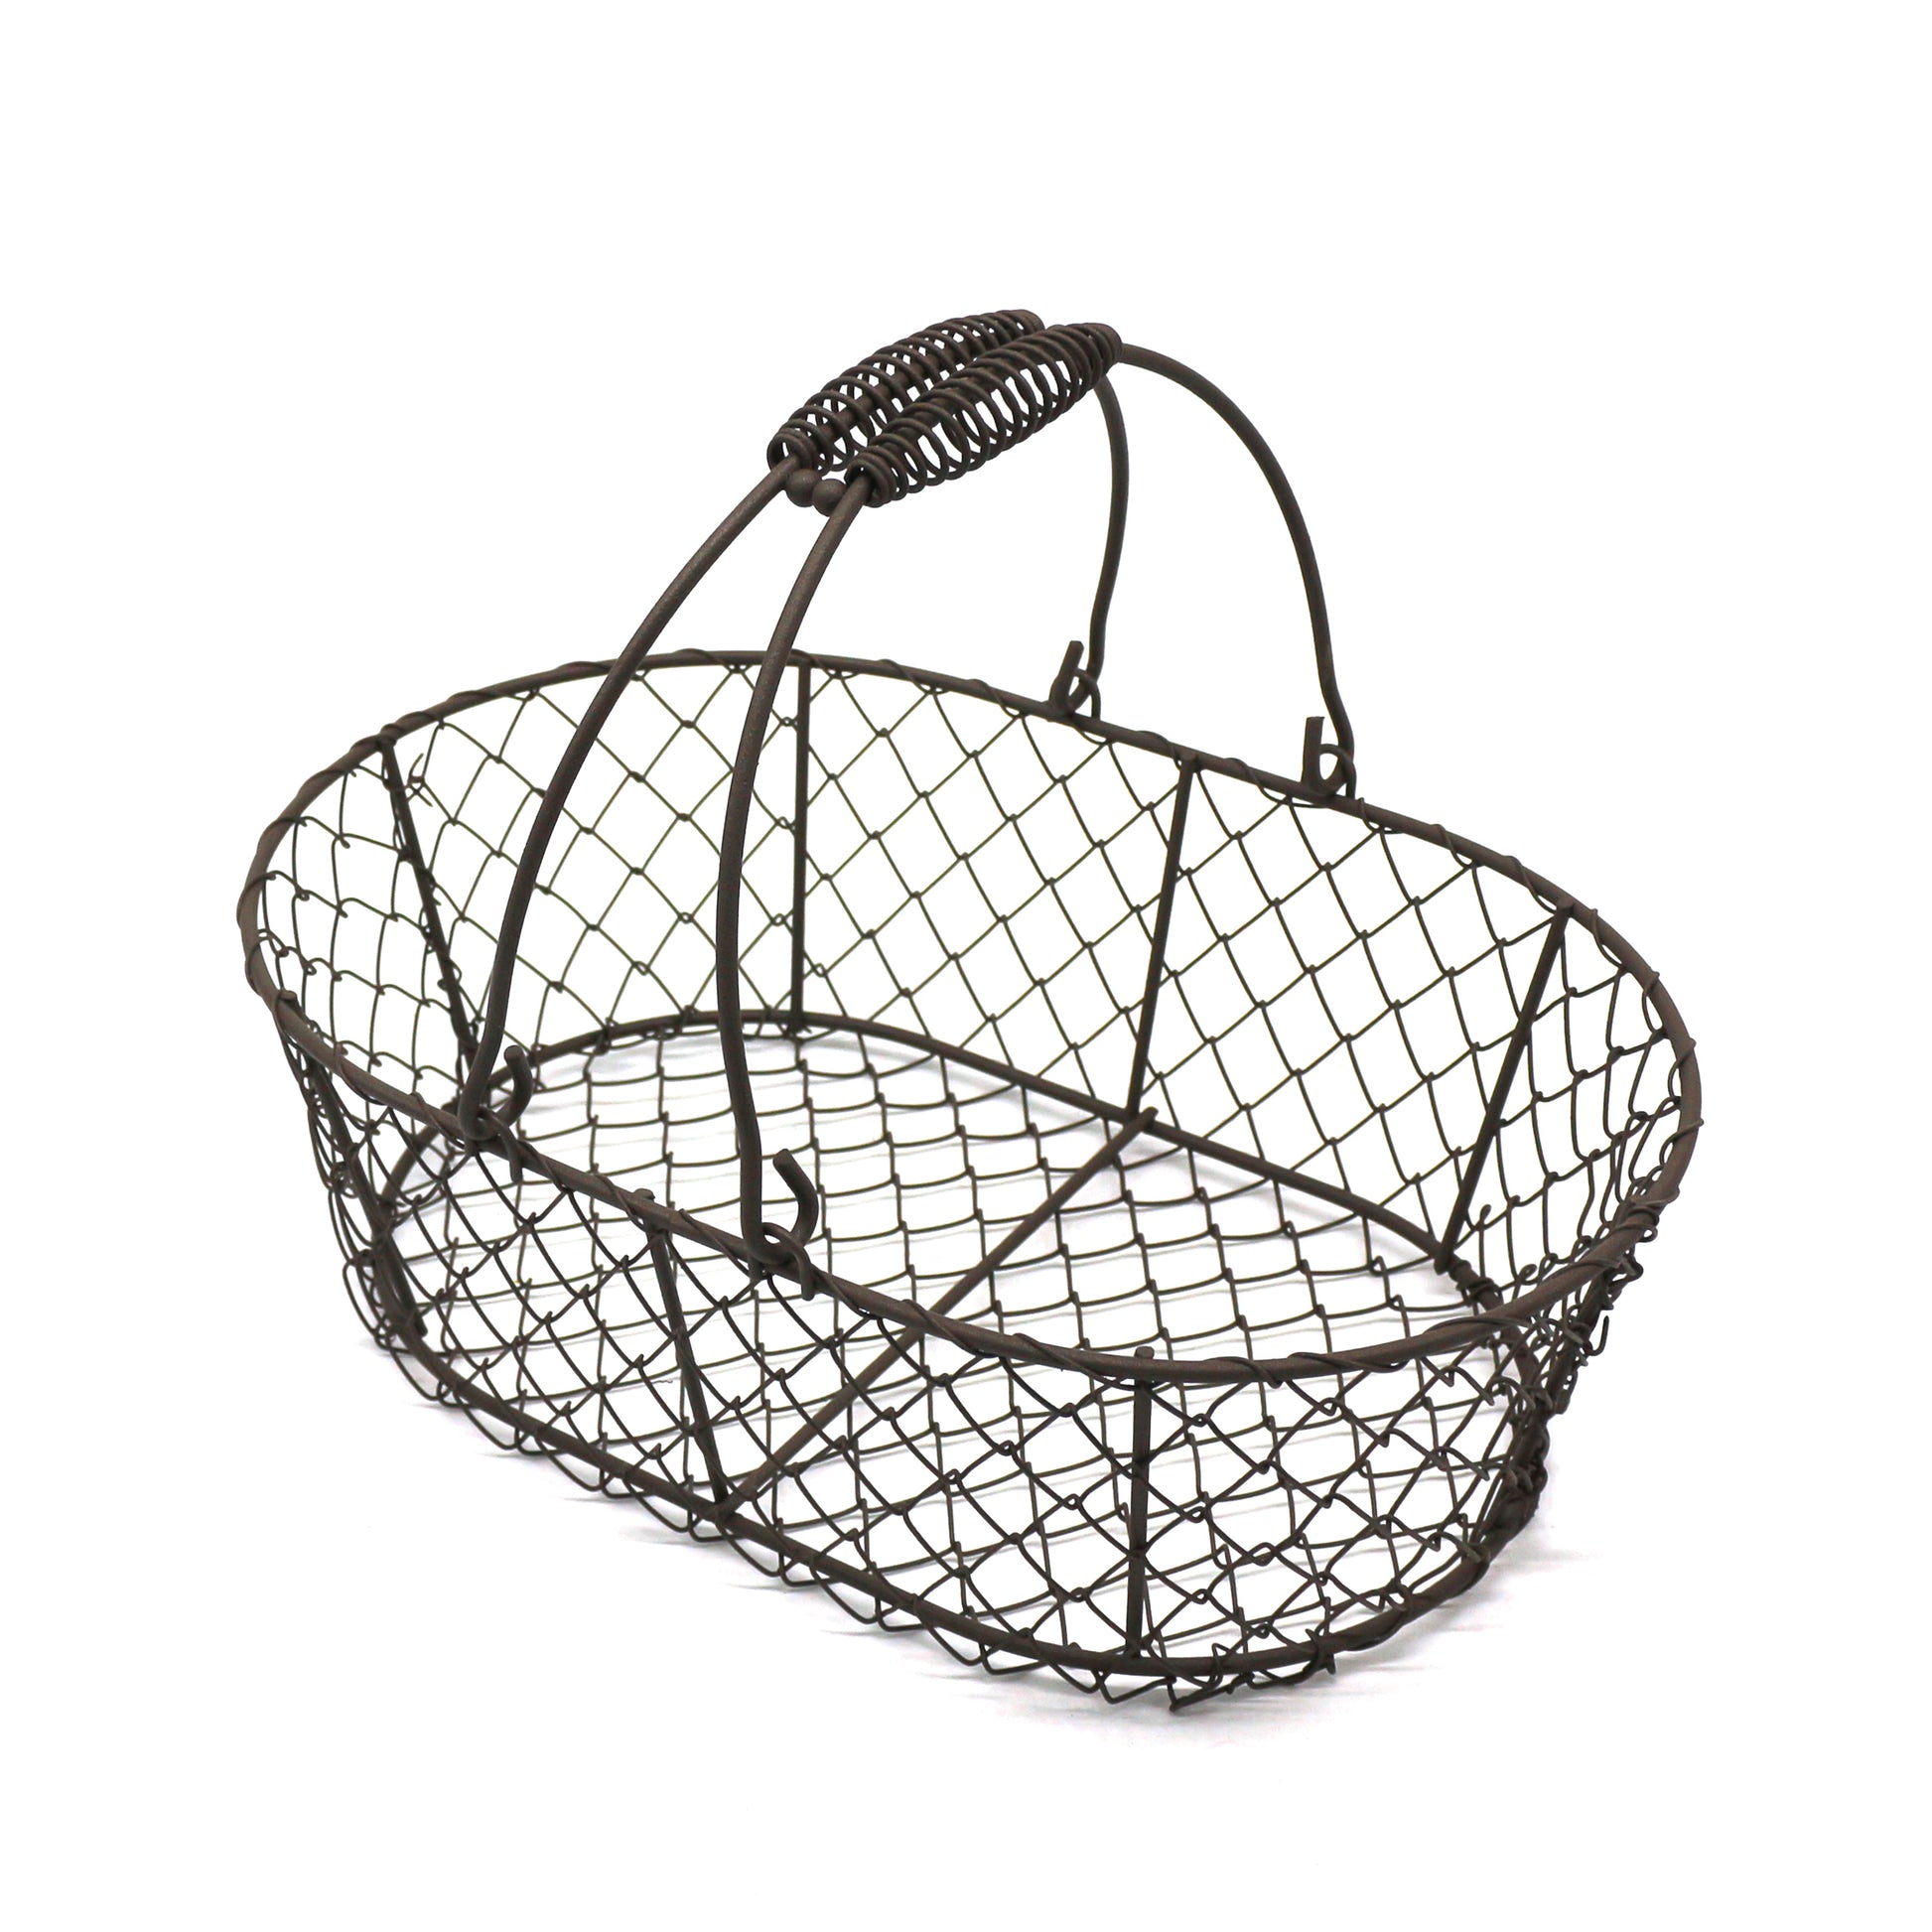 Metal Wire Egg Basket With Wooden Handle Vintage Country Style